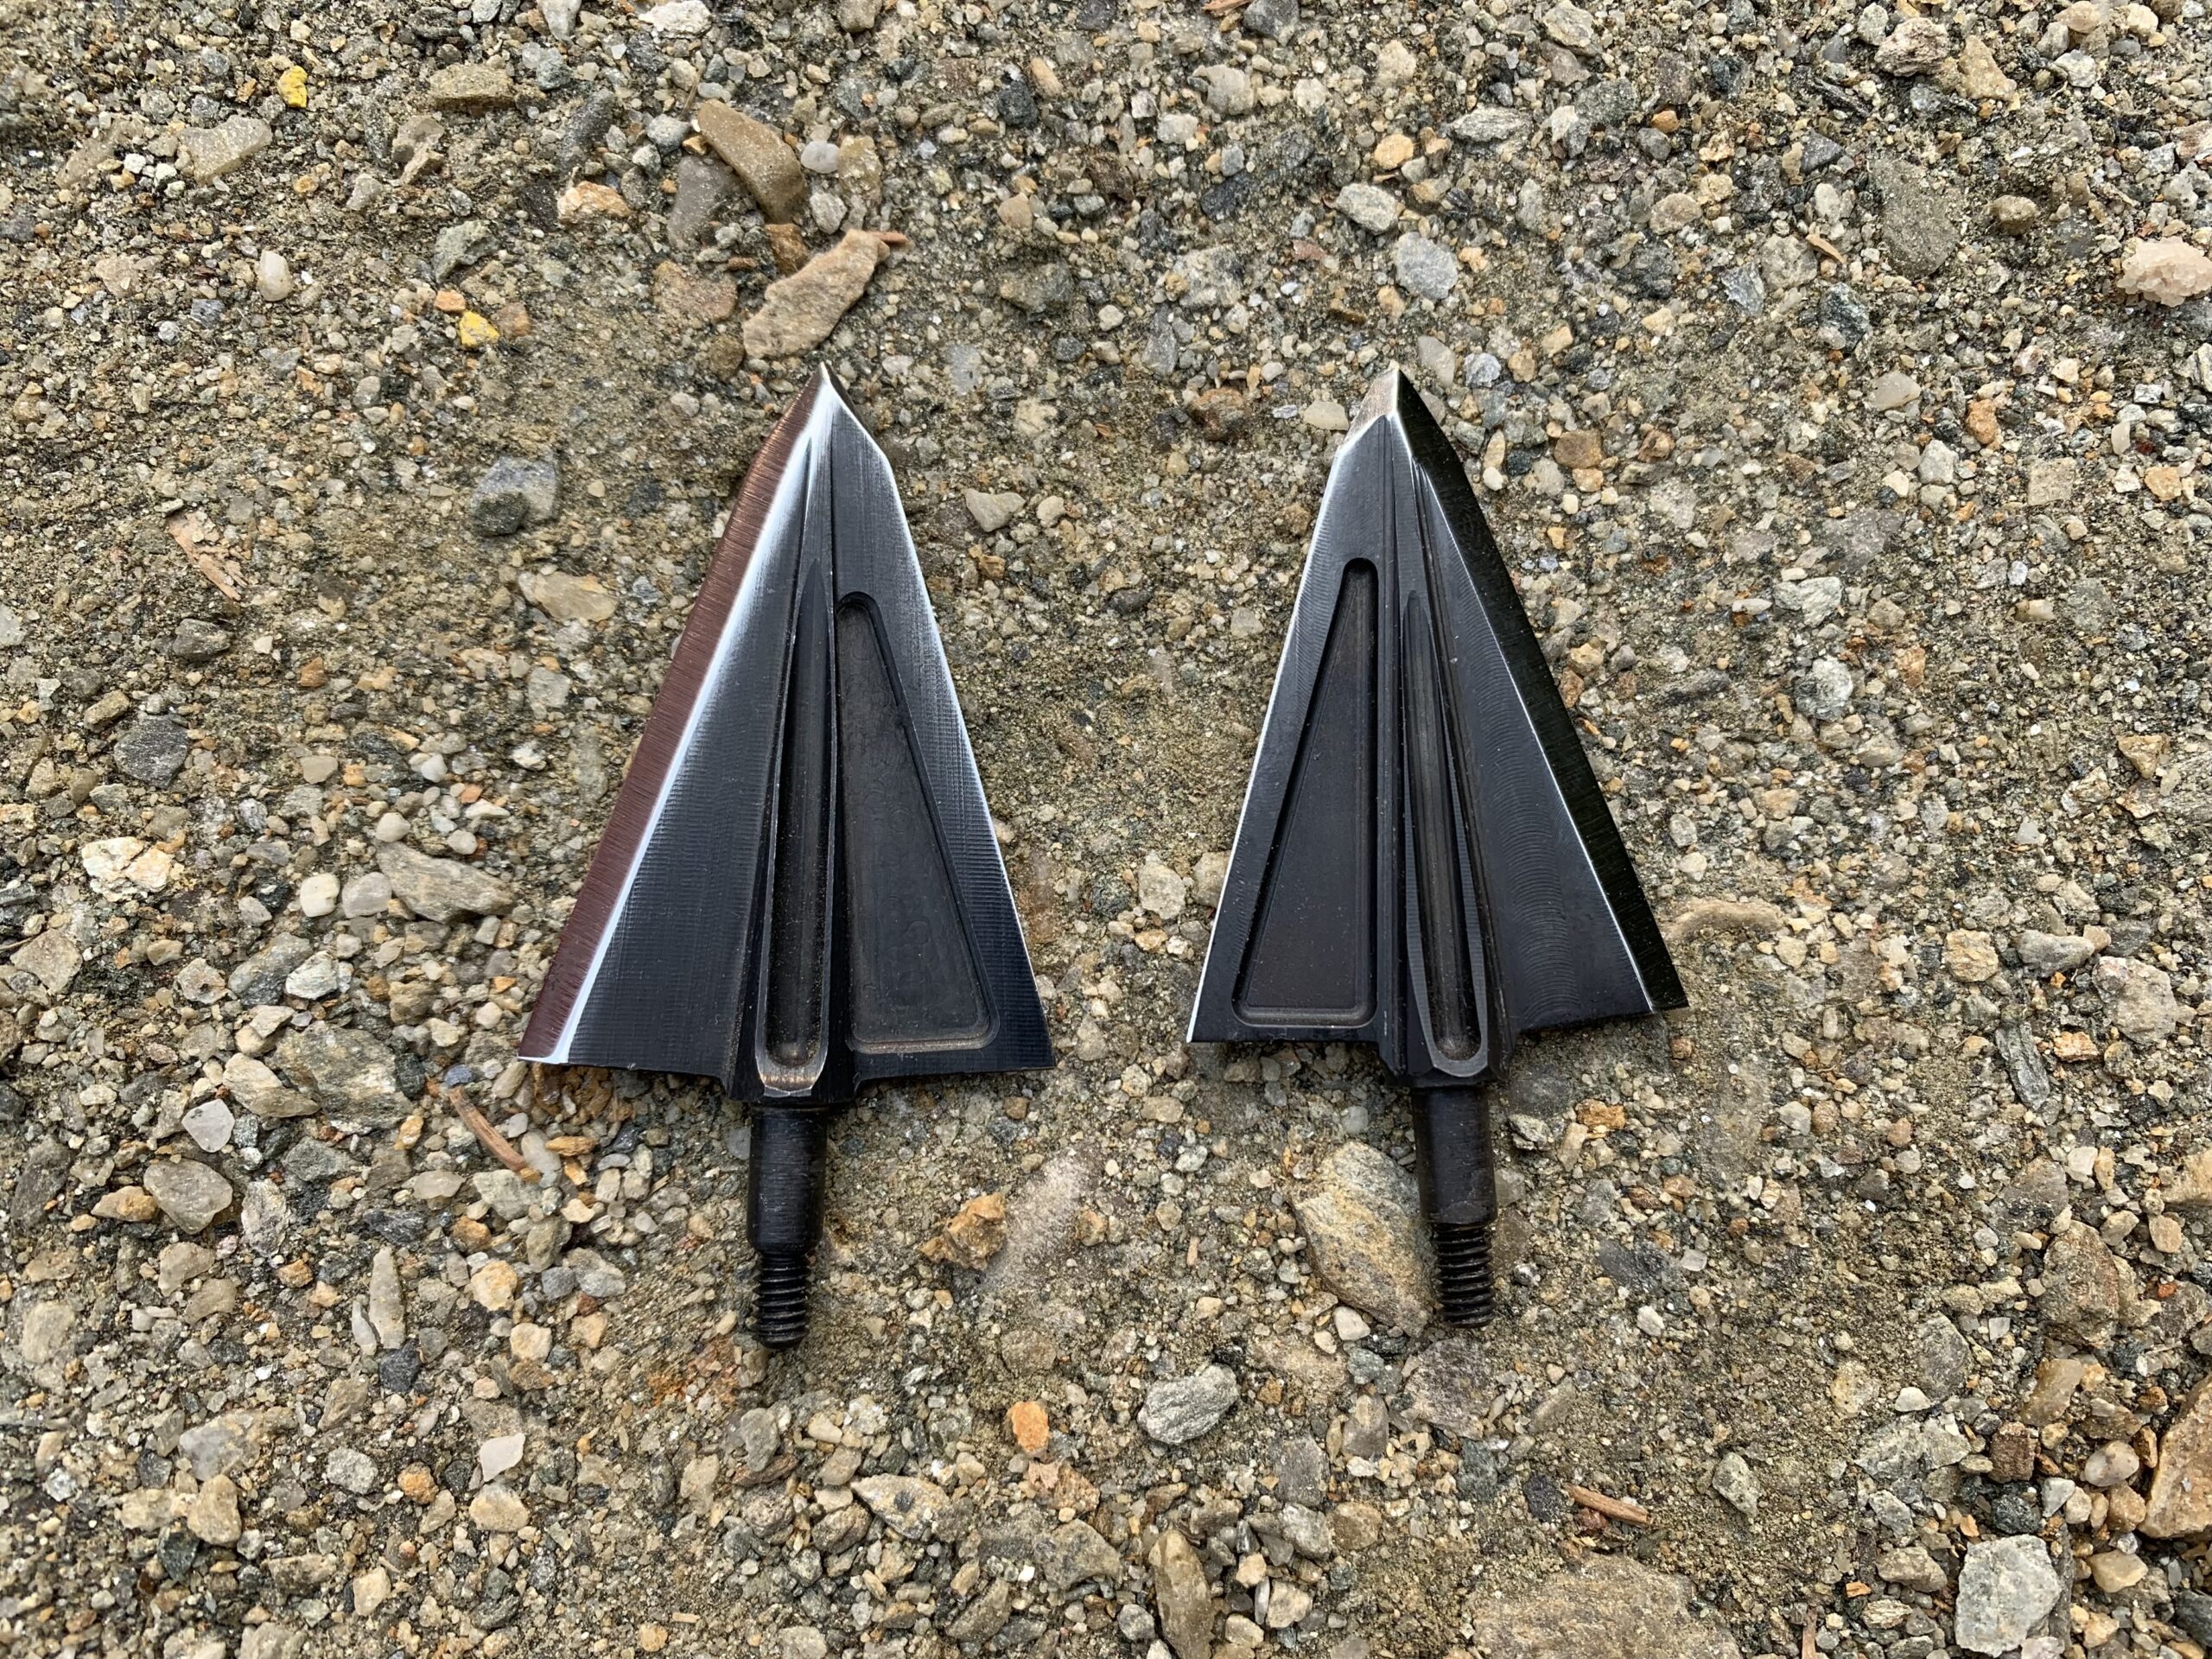 single bevel broadheads come in left and right bevel configurations